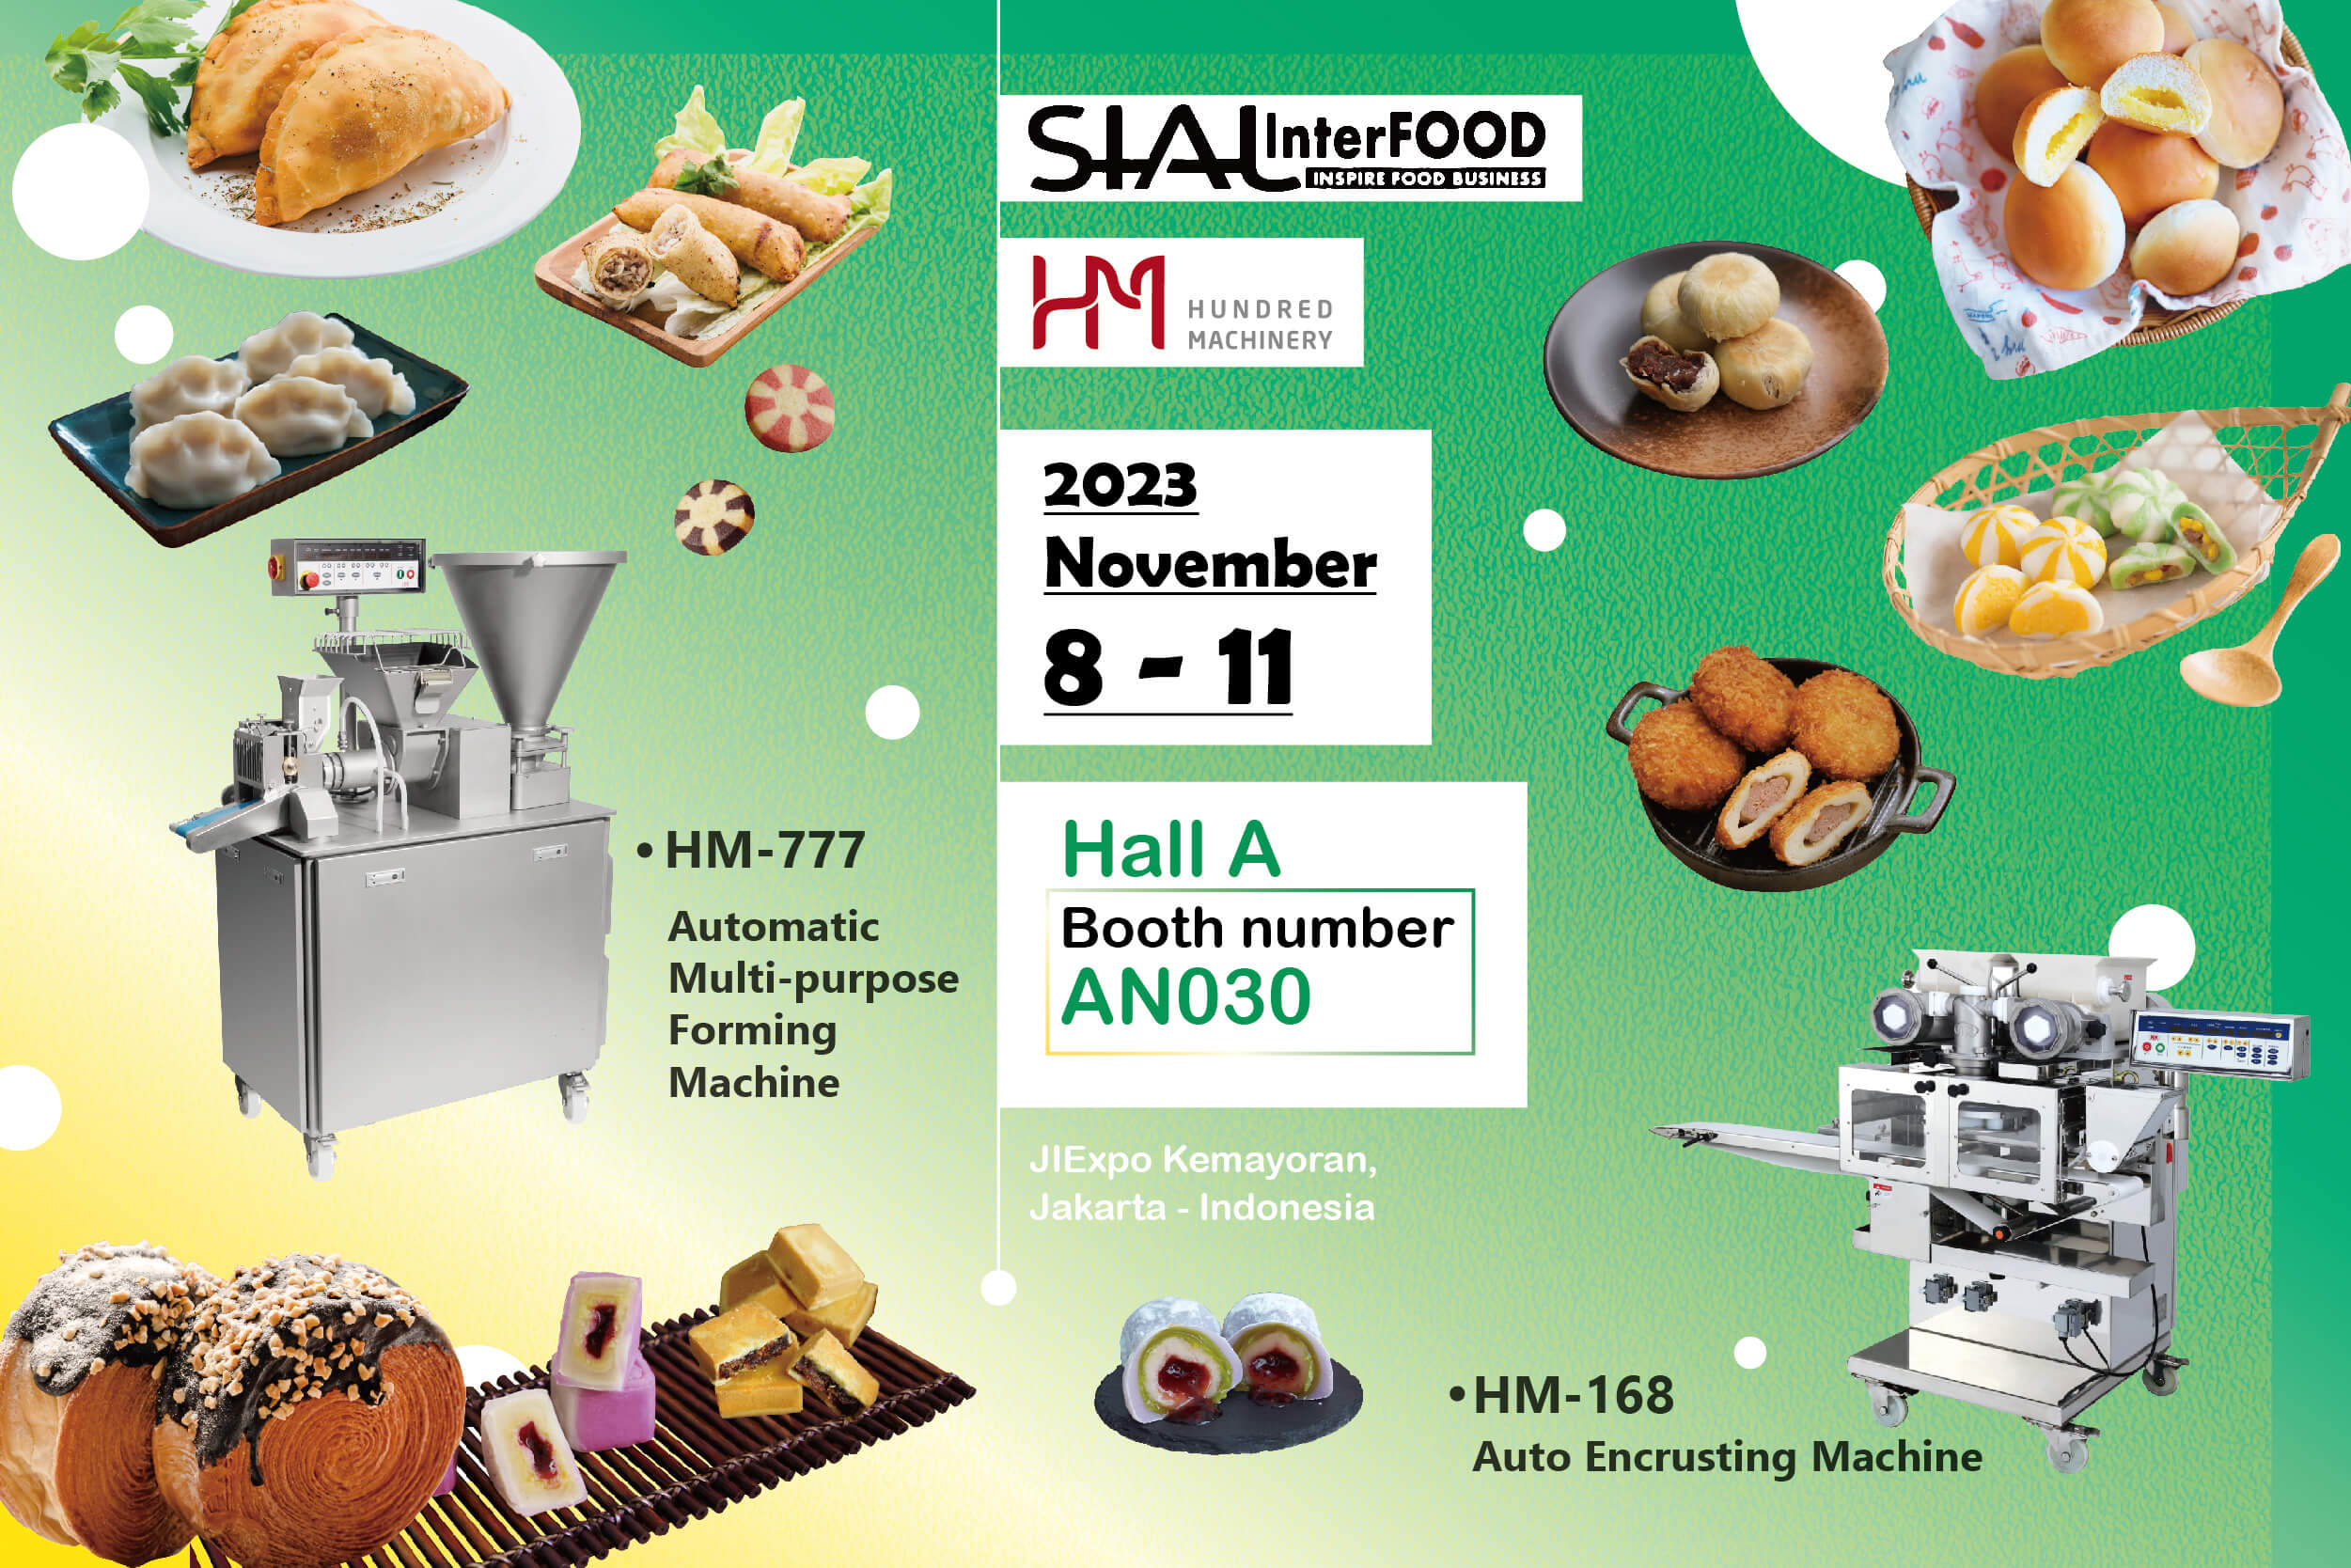 SIAL INTERFOOD 2023